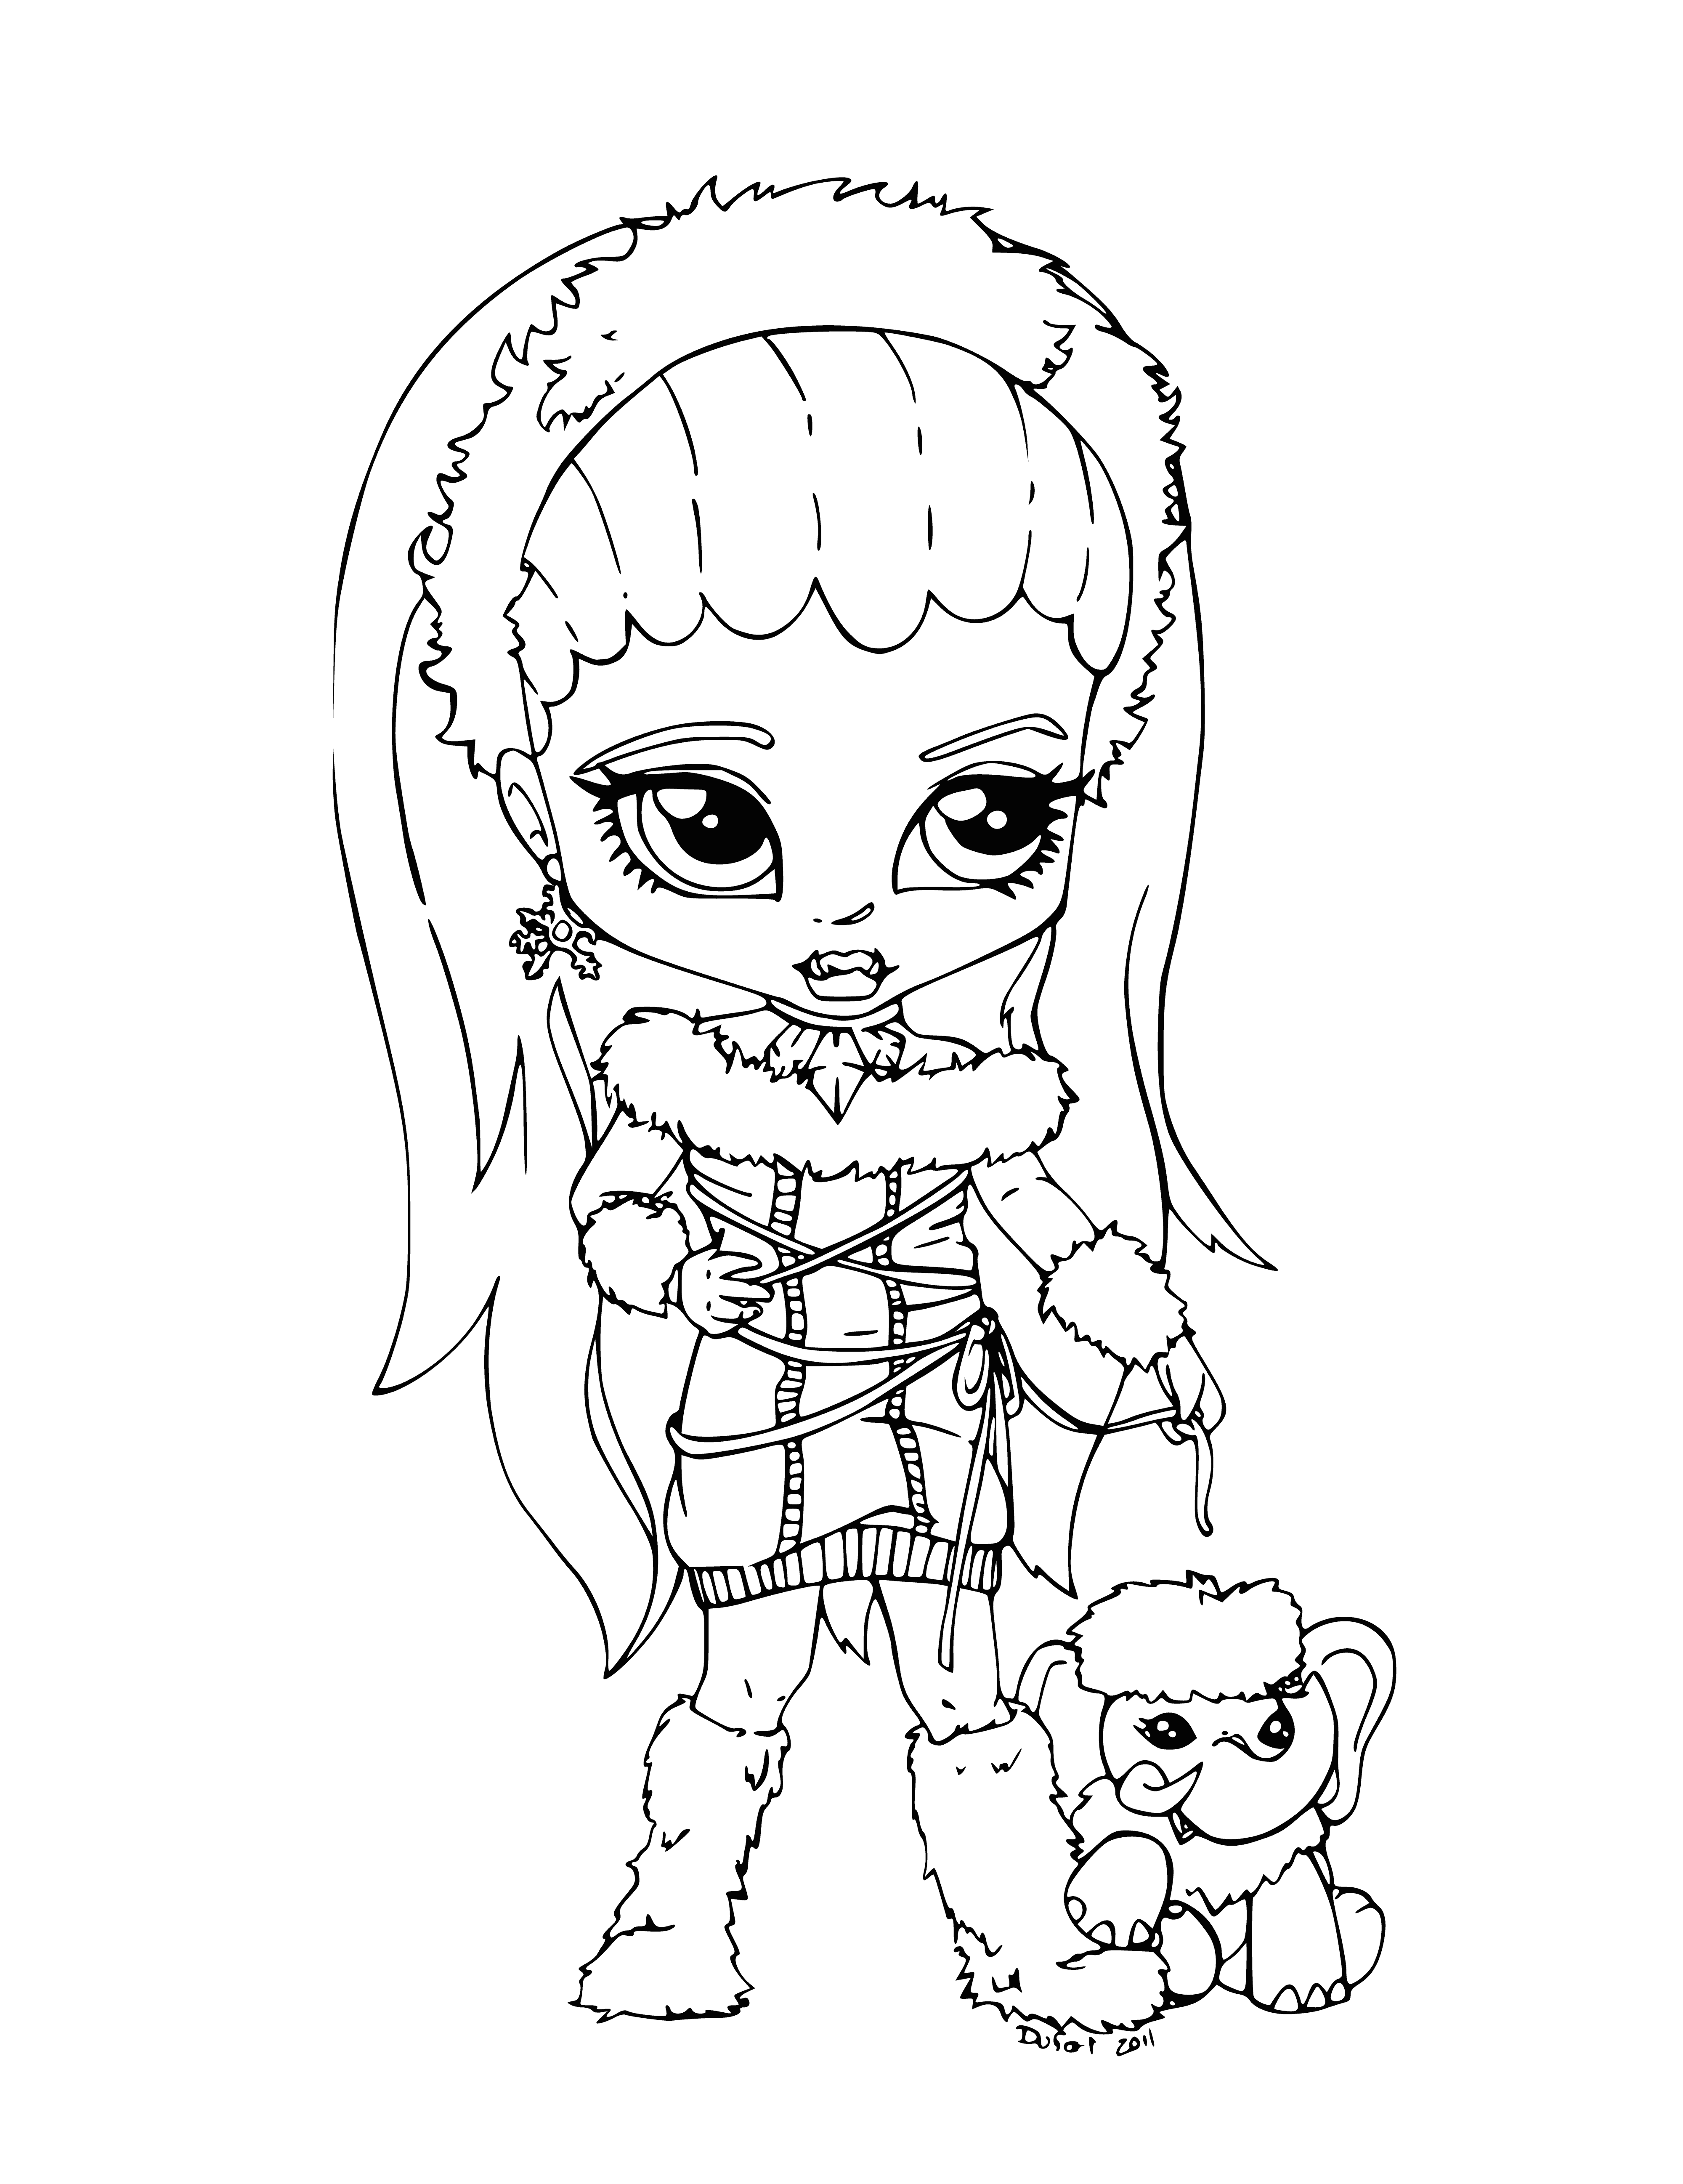 Abby Bominable with a pet coloring page